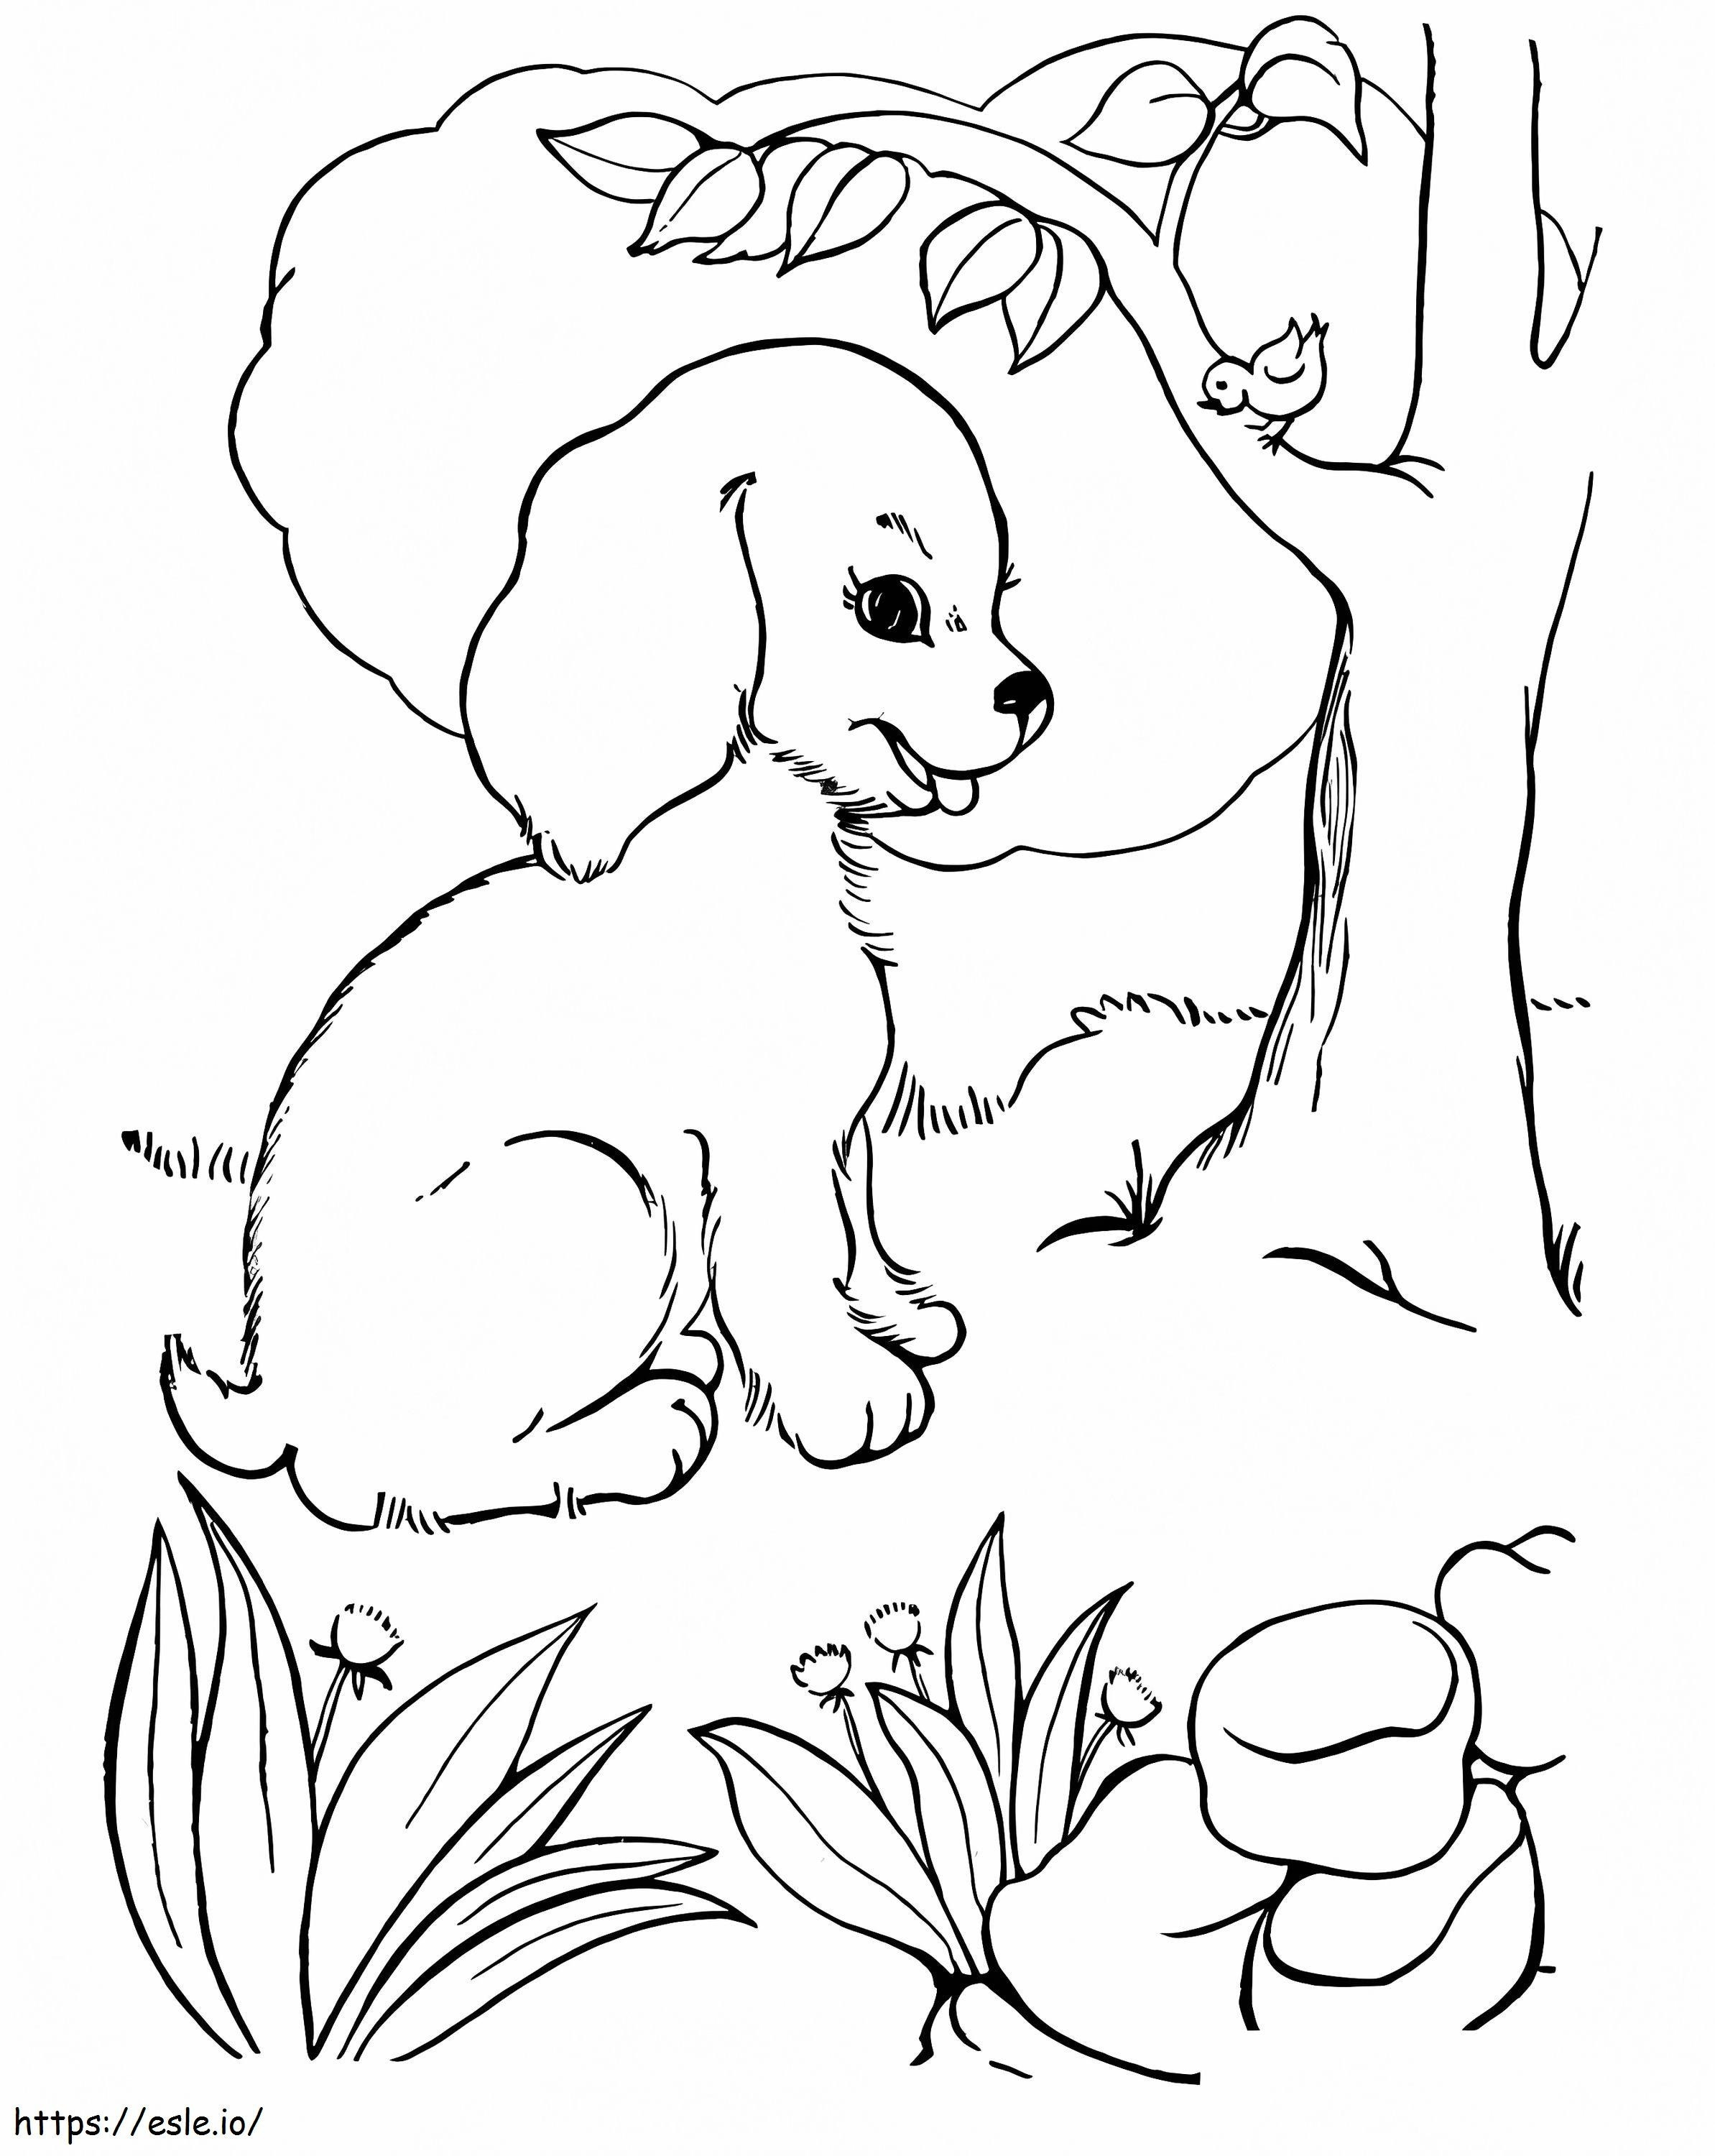 Bird And Puppy coloring page